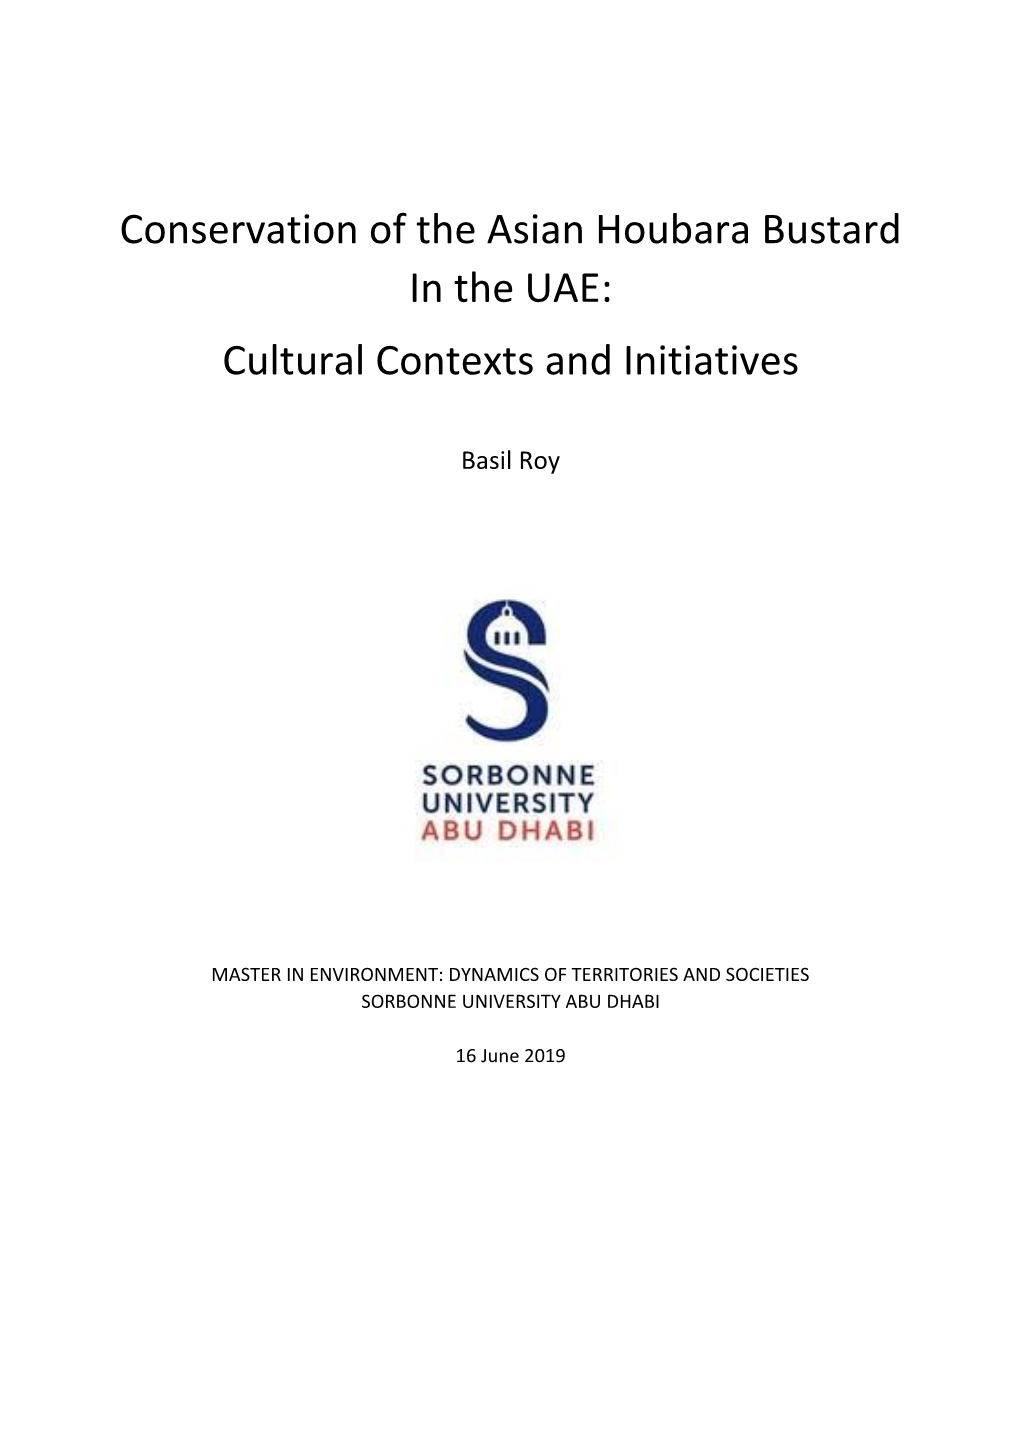 Conservation of the Asian Houbara Bustard in the UAE: Cultural Contexts and Initiatives